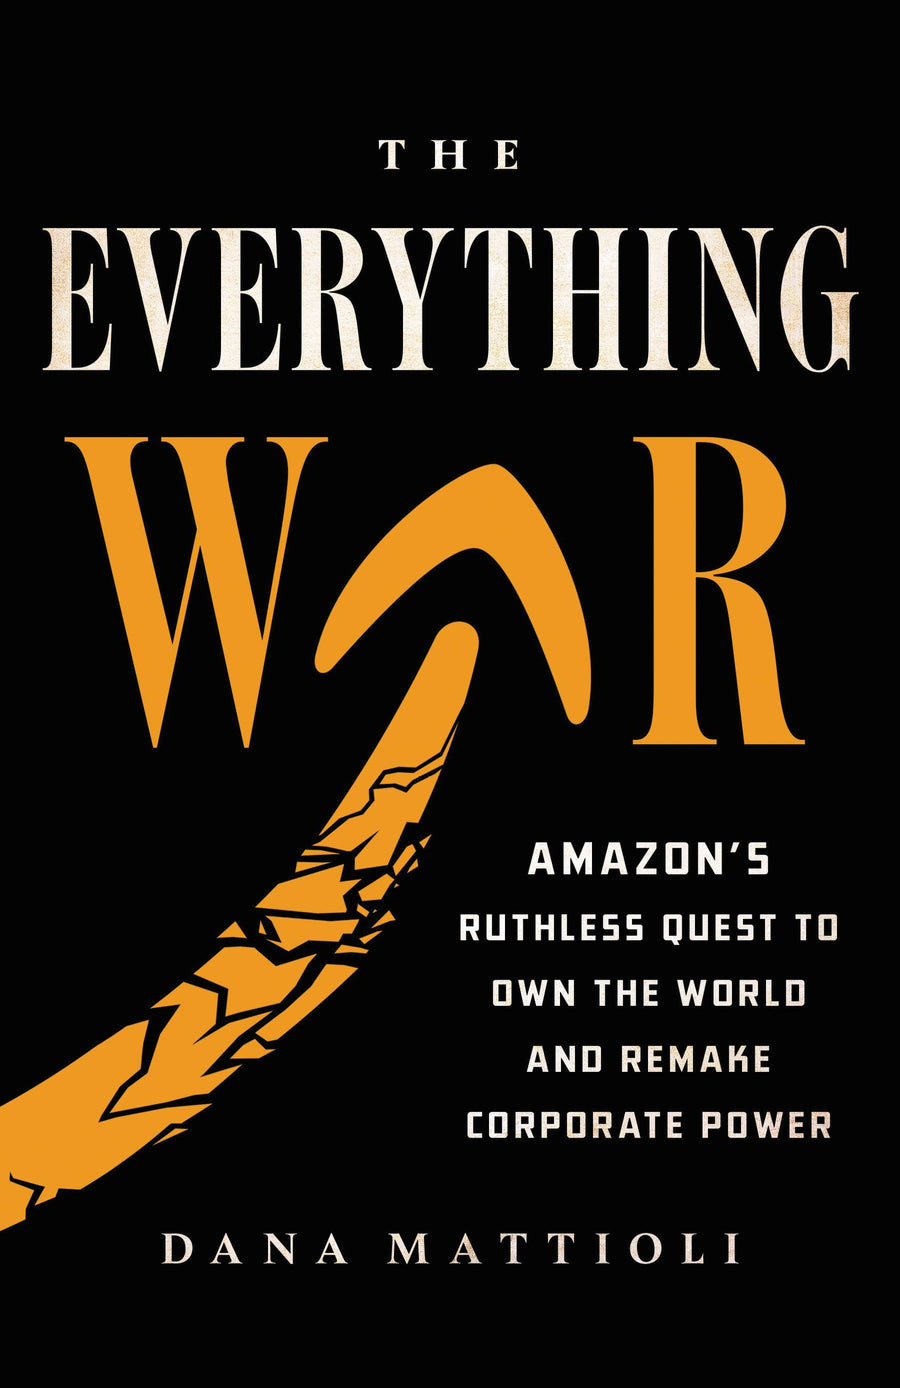 The Everything War